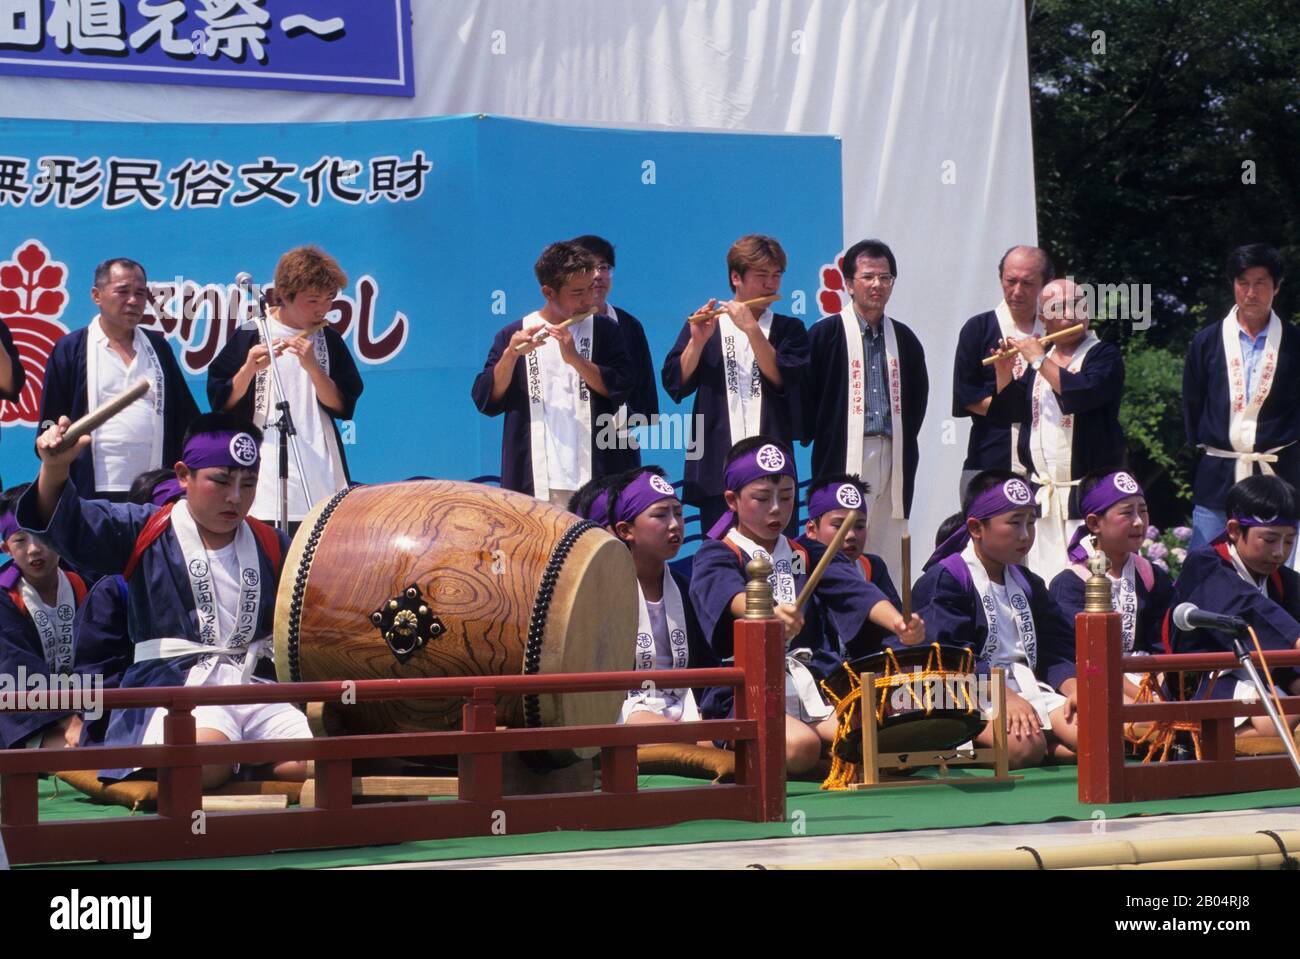 Japanese teenage boy playing a traditional Taiko drum in an orchestra during a farmer’s festival in the Korakuen Garden, a Japanese garden located in Stock Photo